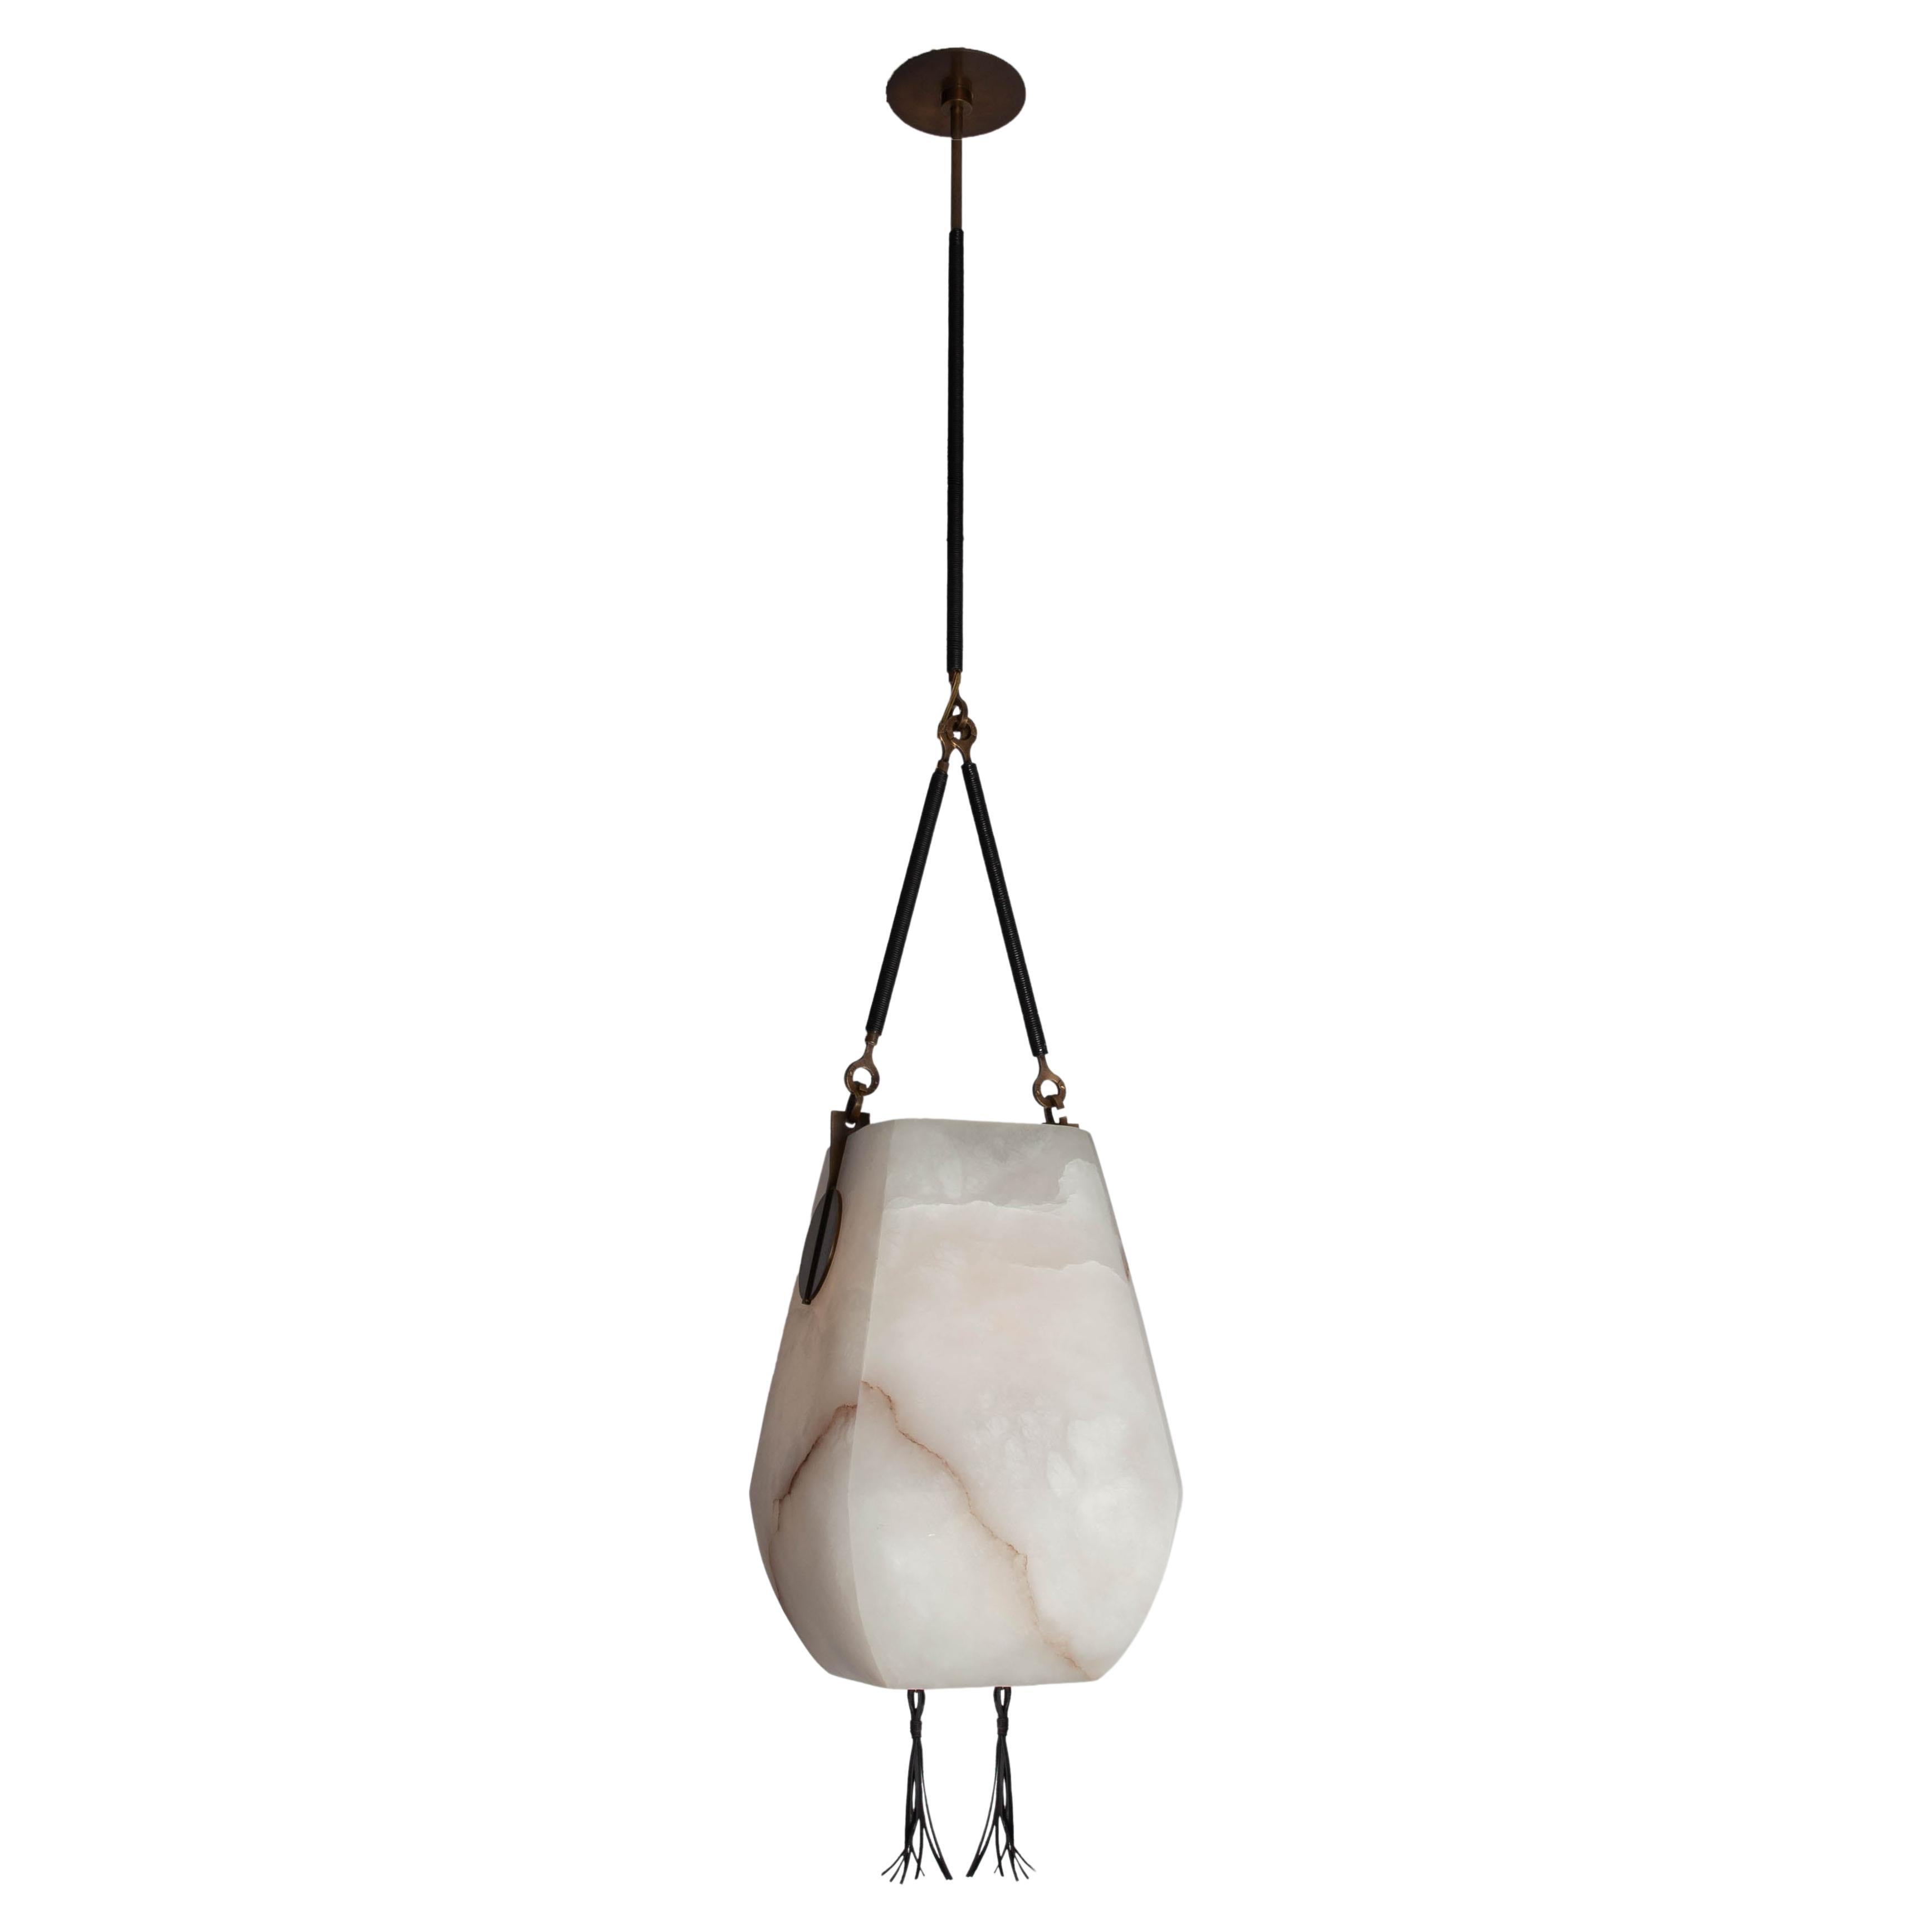 Kalathi Lantern by M.Fisher x Remains Lighting Co. For Sale